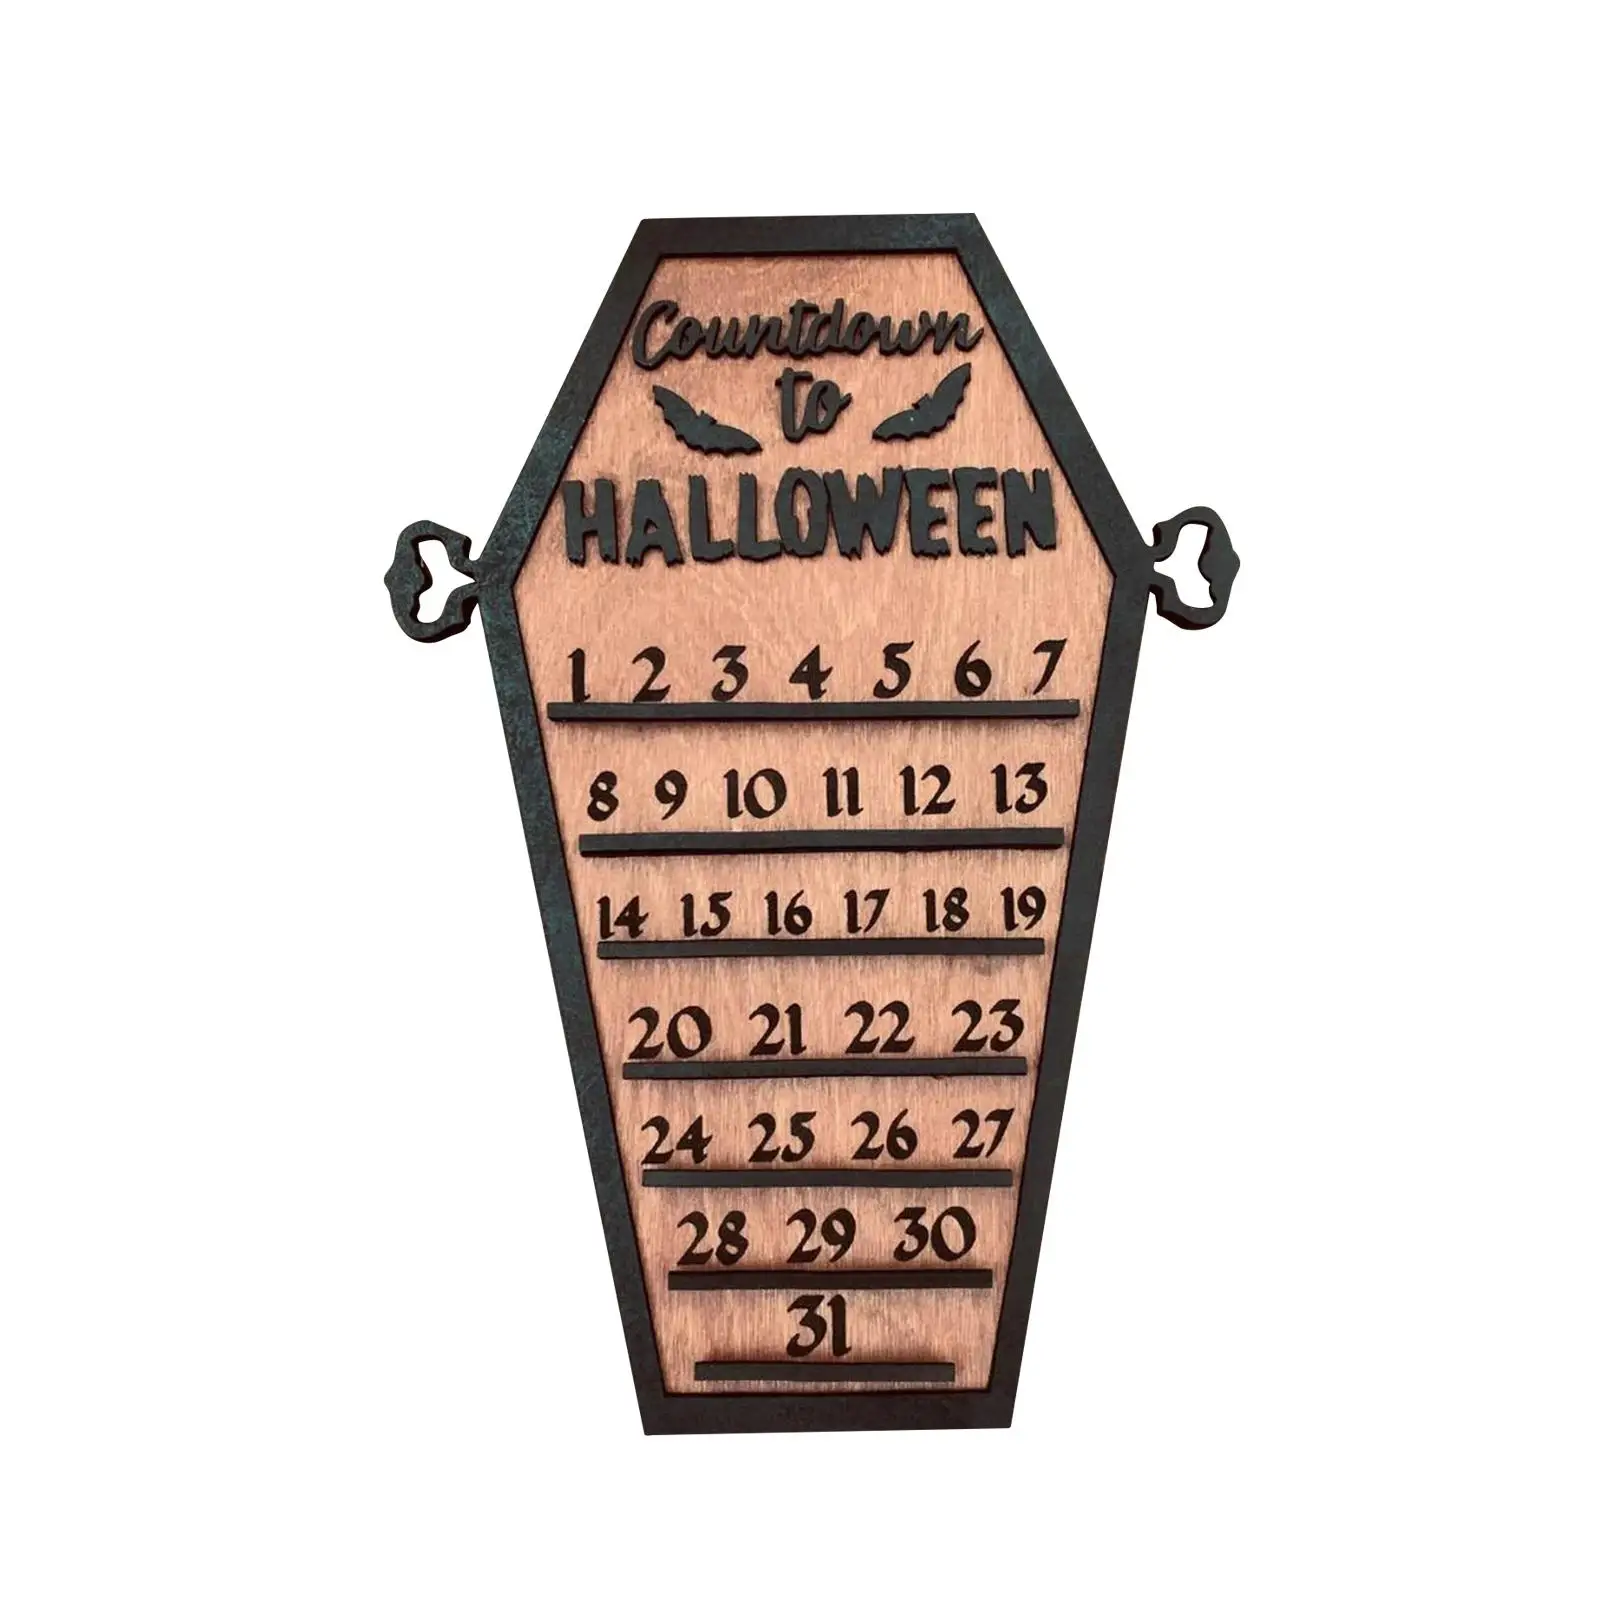 Halloween Countdown Calendar Wood Crafts 31 Day Halloween Advent Calendar Ornaments for Haunted House Party Home Festive Table